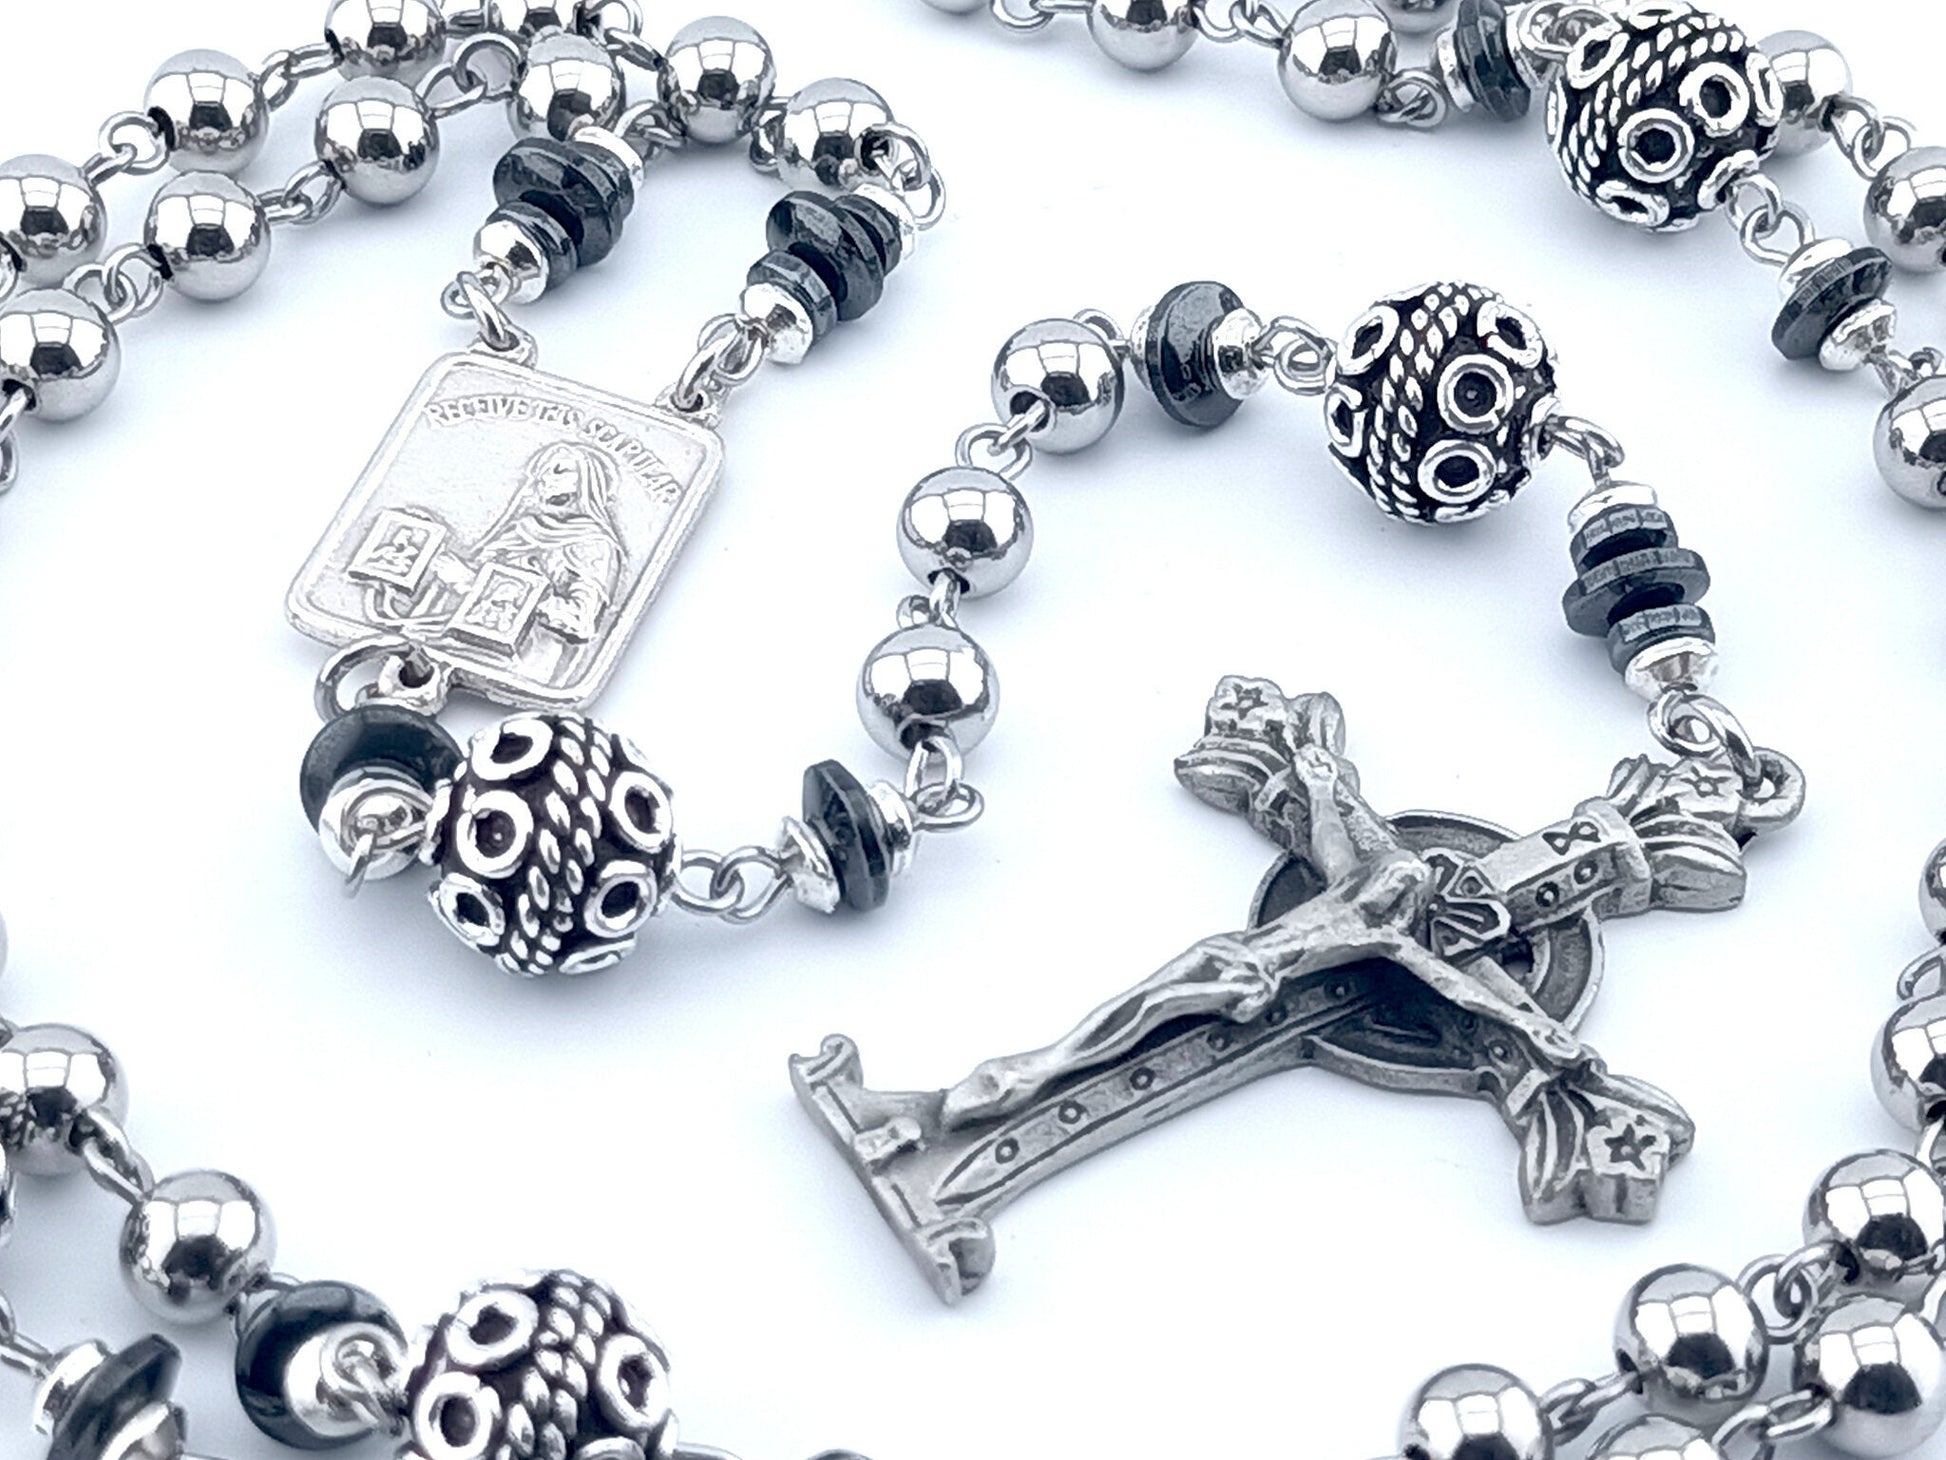 Brown Scapular unique rosary beads with stainless steel beads, pewter crucifix, silver pater beads and centre medal.